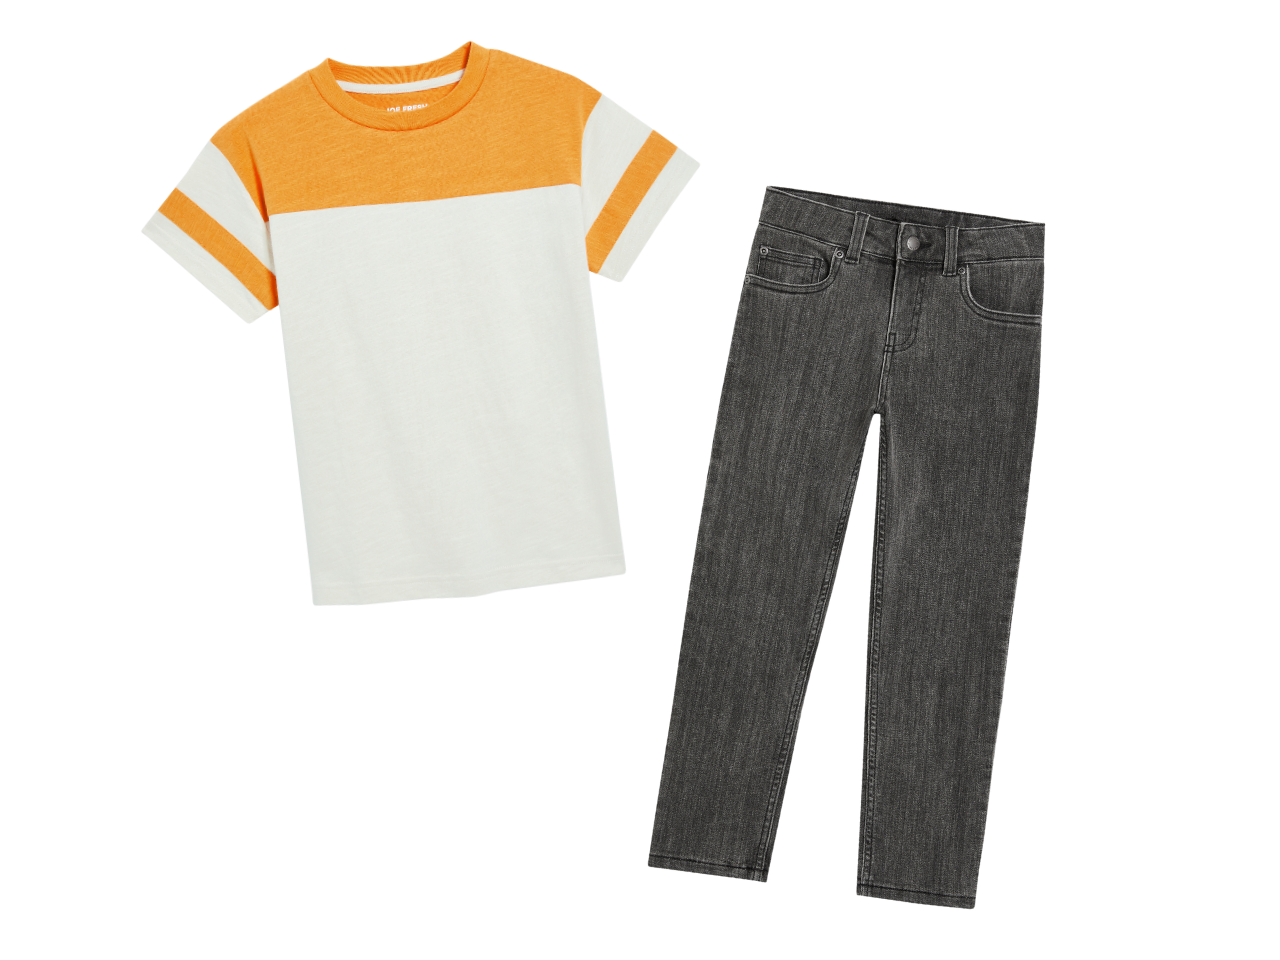 Back-to-School Style on a Budget: 5 Key Trends from Joe Fresh